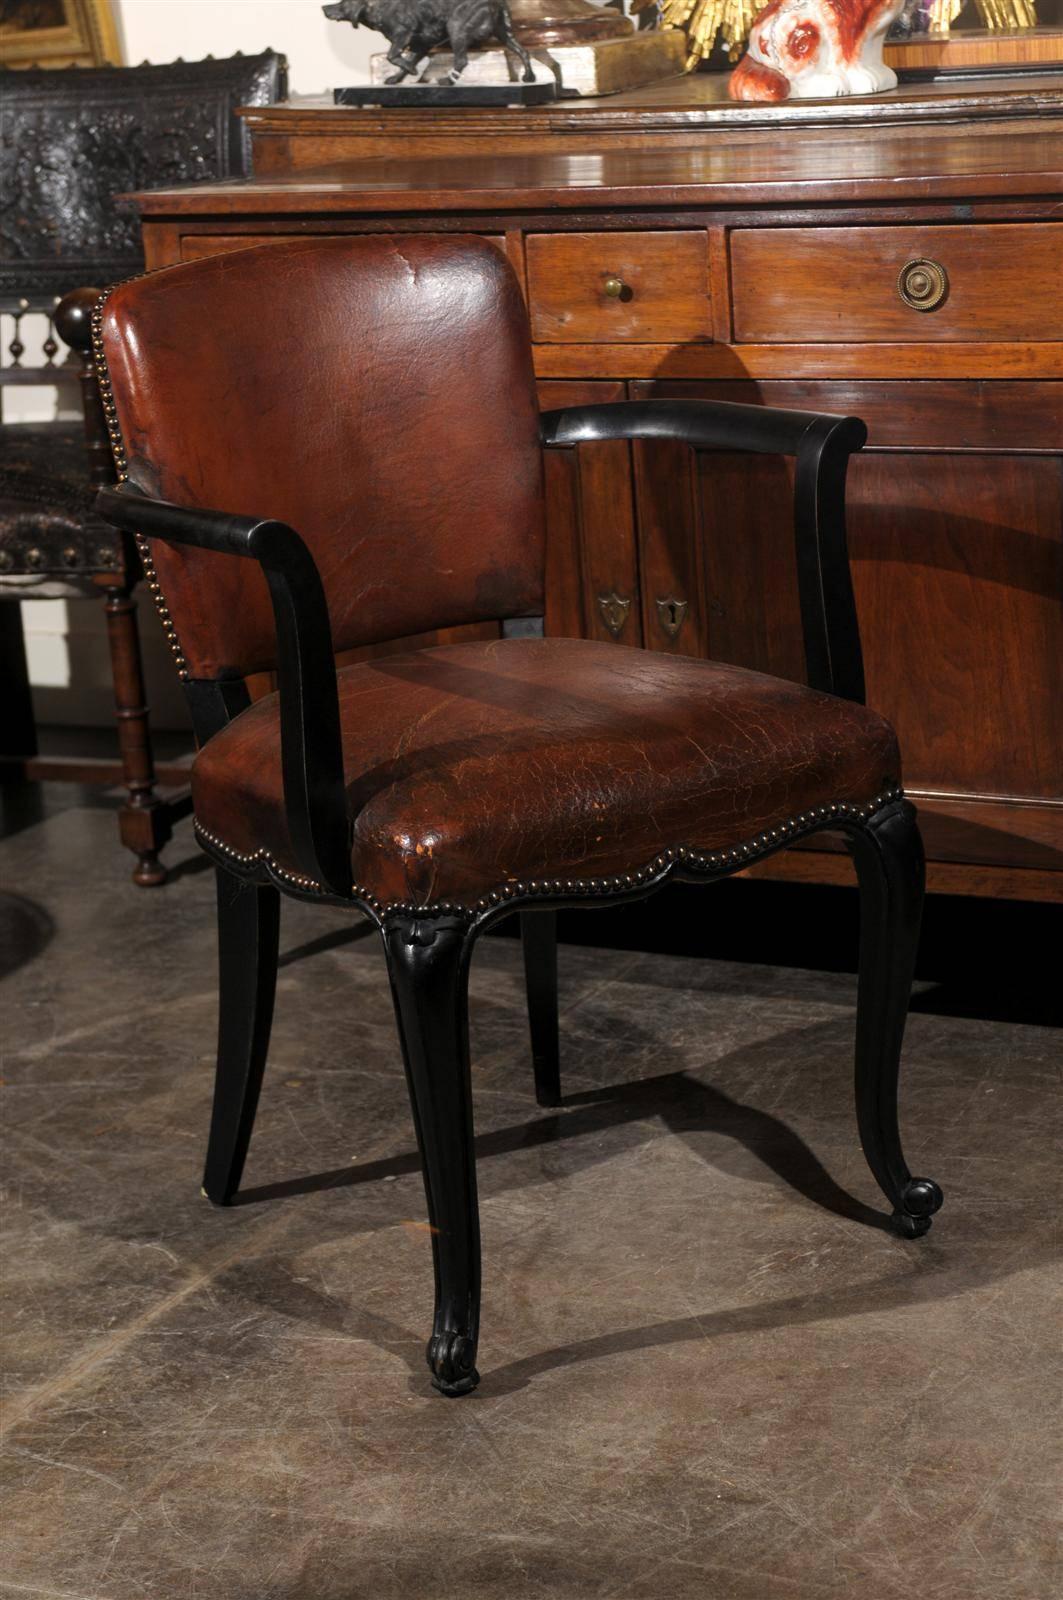 This pair of French Art Deco armchairs from the early 20th century features their original brown leather backs and seats over an ebonized wood structure. The backs, decorated with nail head trims, are slightly curved, allowing the sitter to rest his